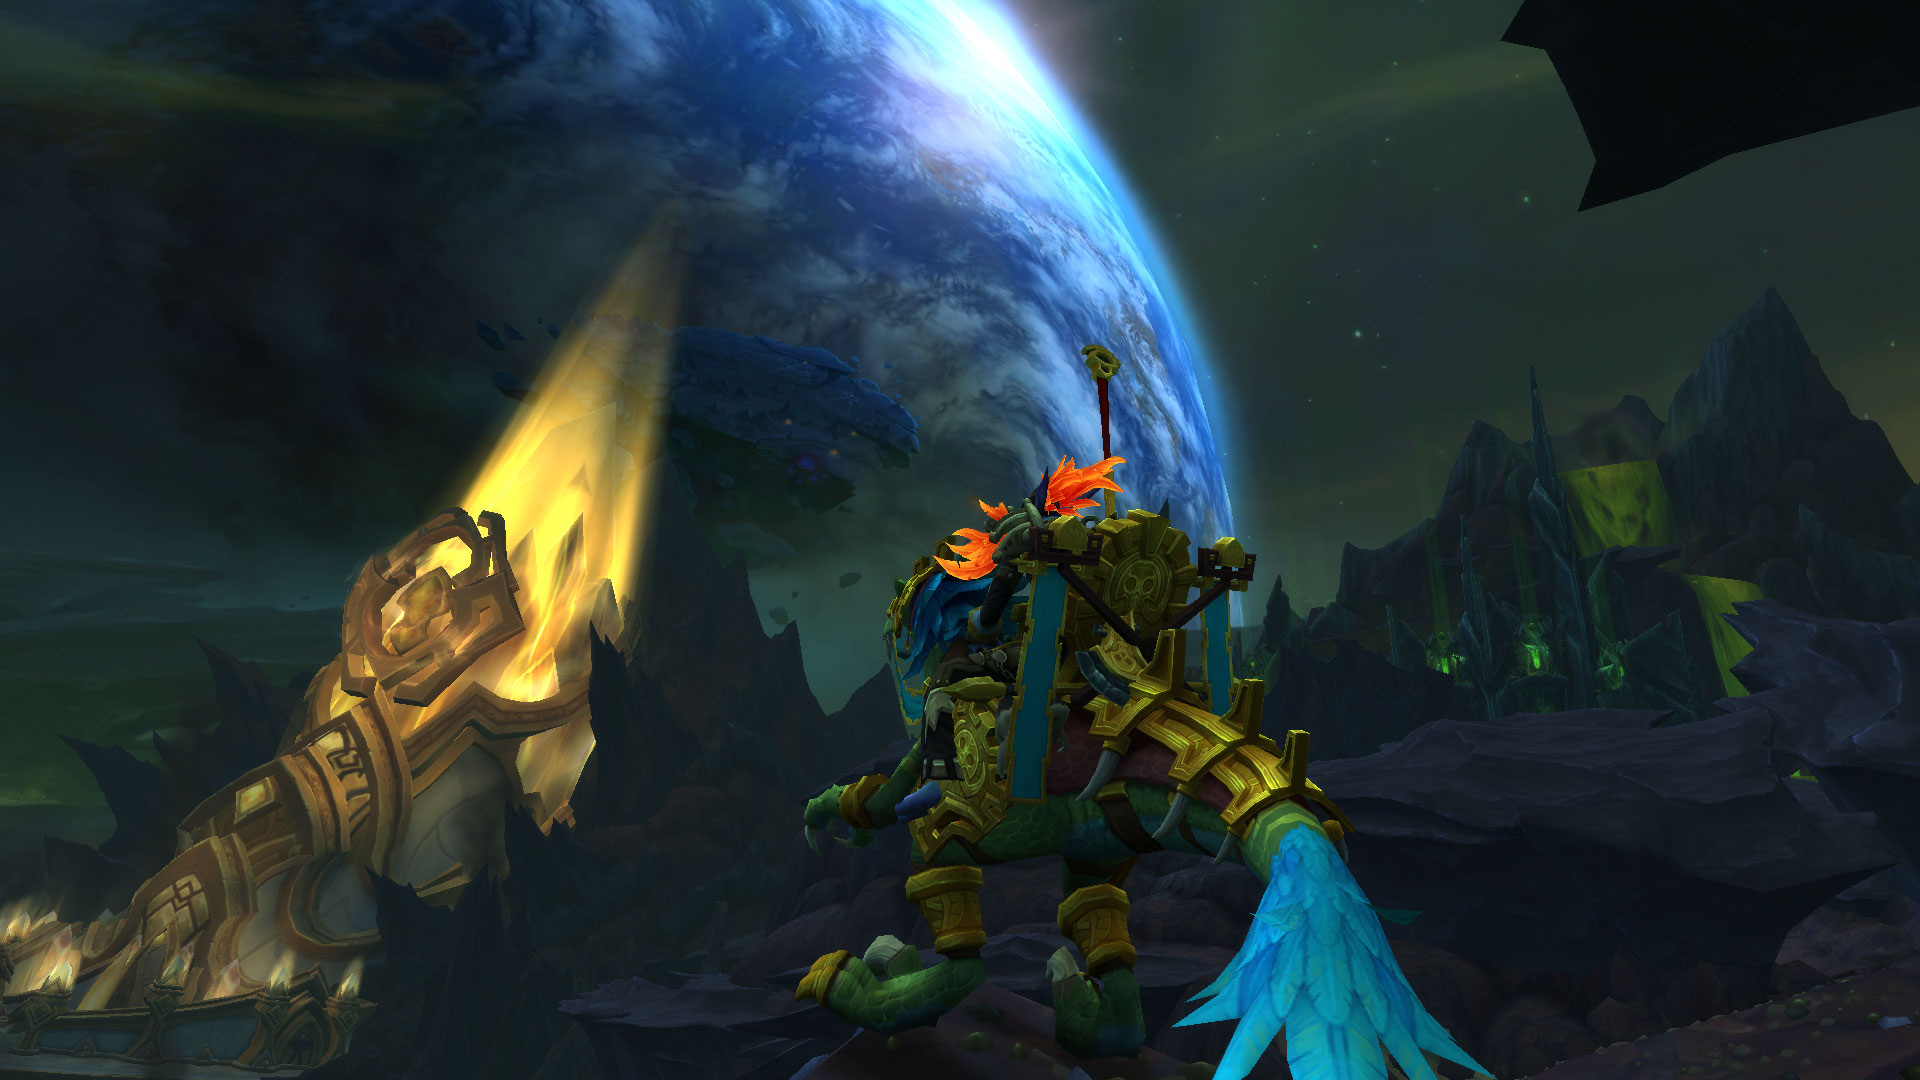 Tips For Finding the Best Zones and Quests To Level Quickly in WoW